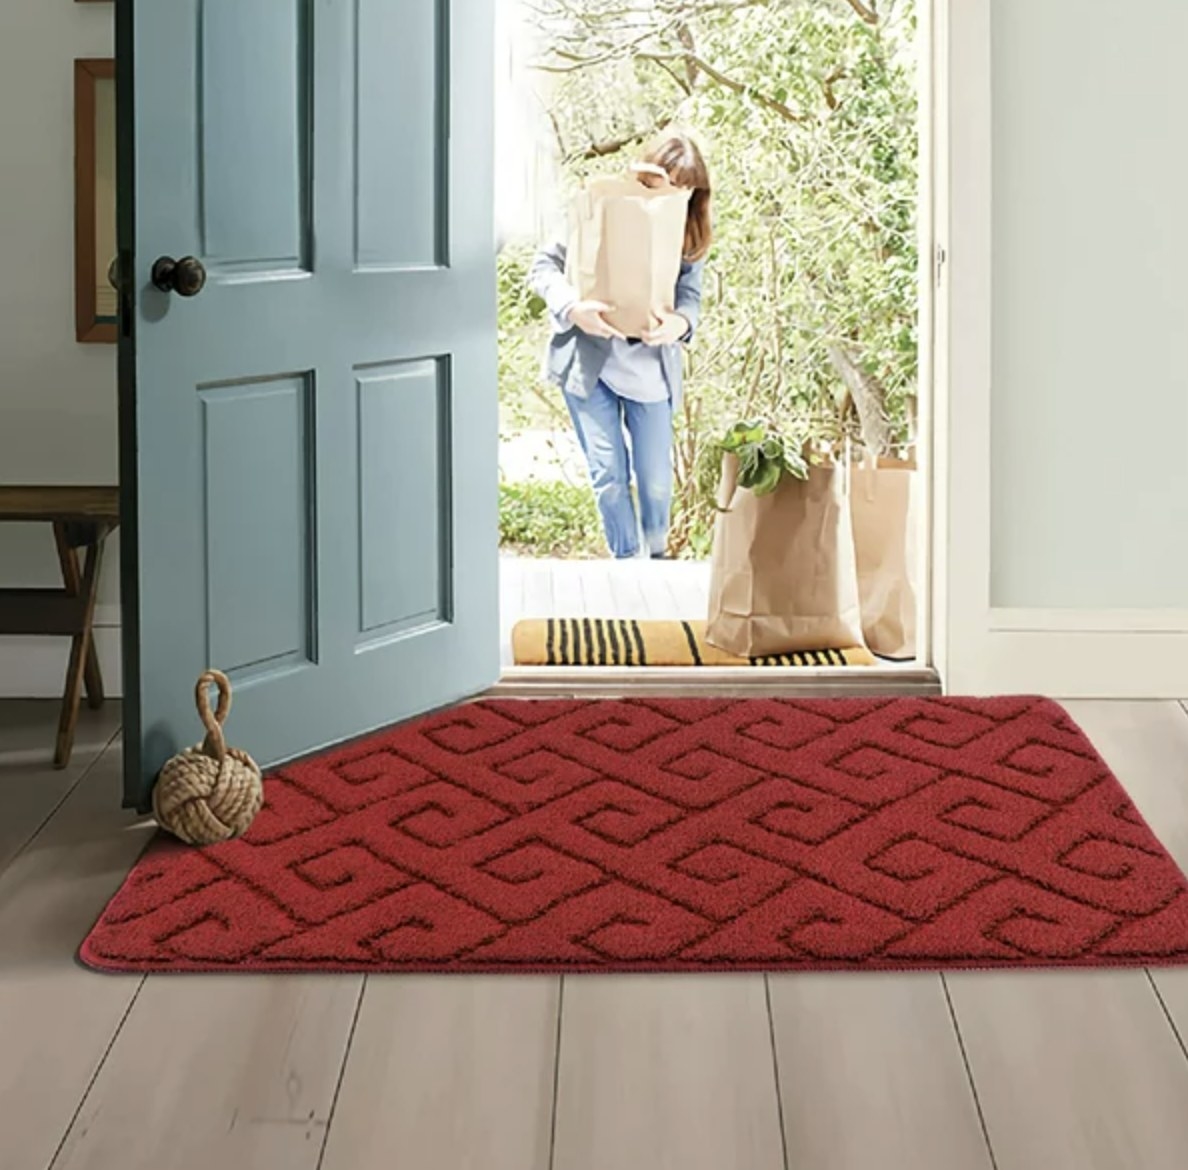 The doormat at the entrance of the house in red